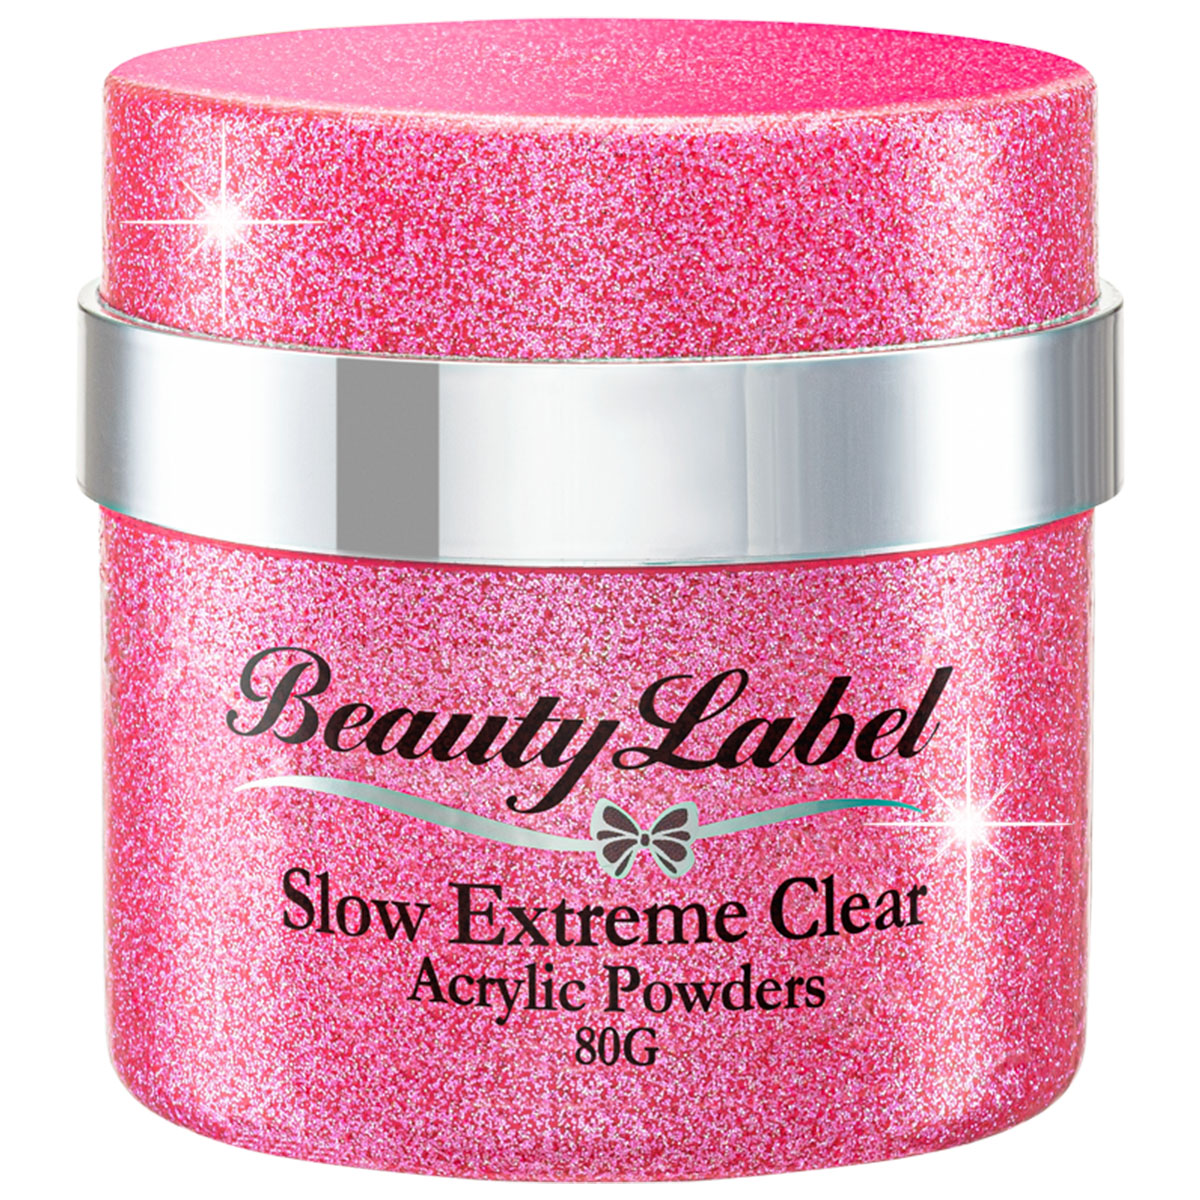 Beauty Label Acrylic Powders - Slow Extreme Clear